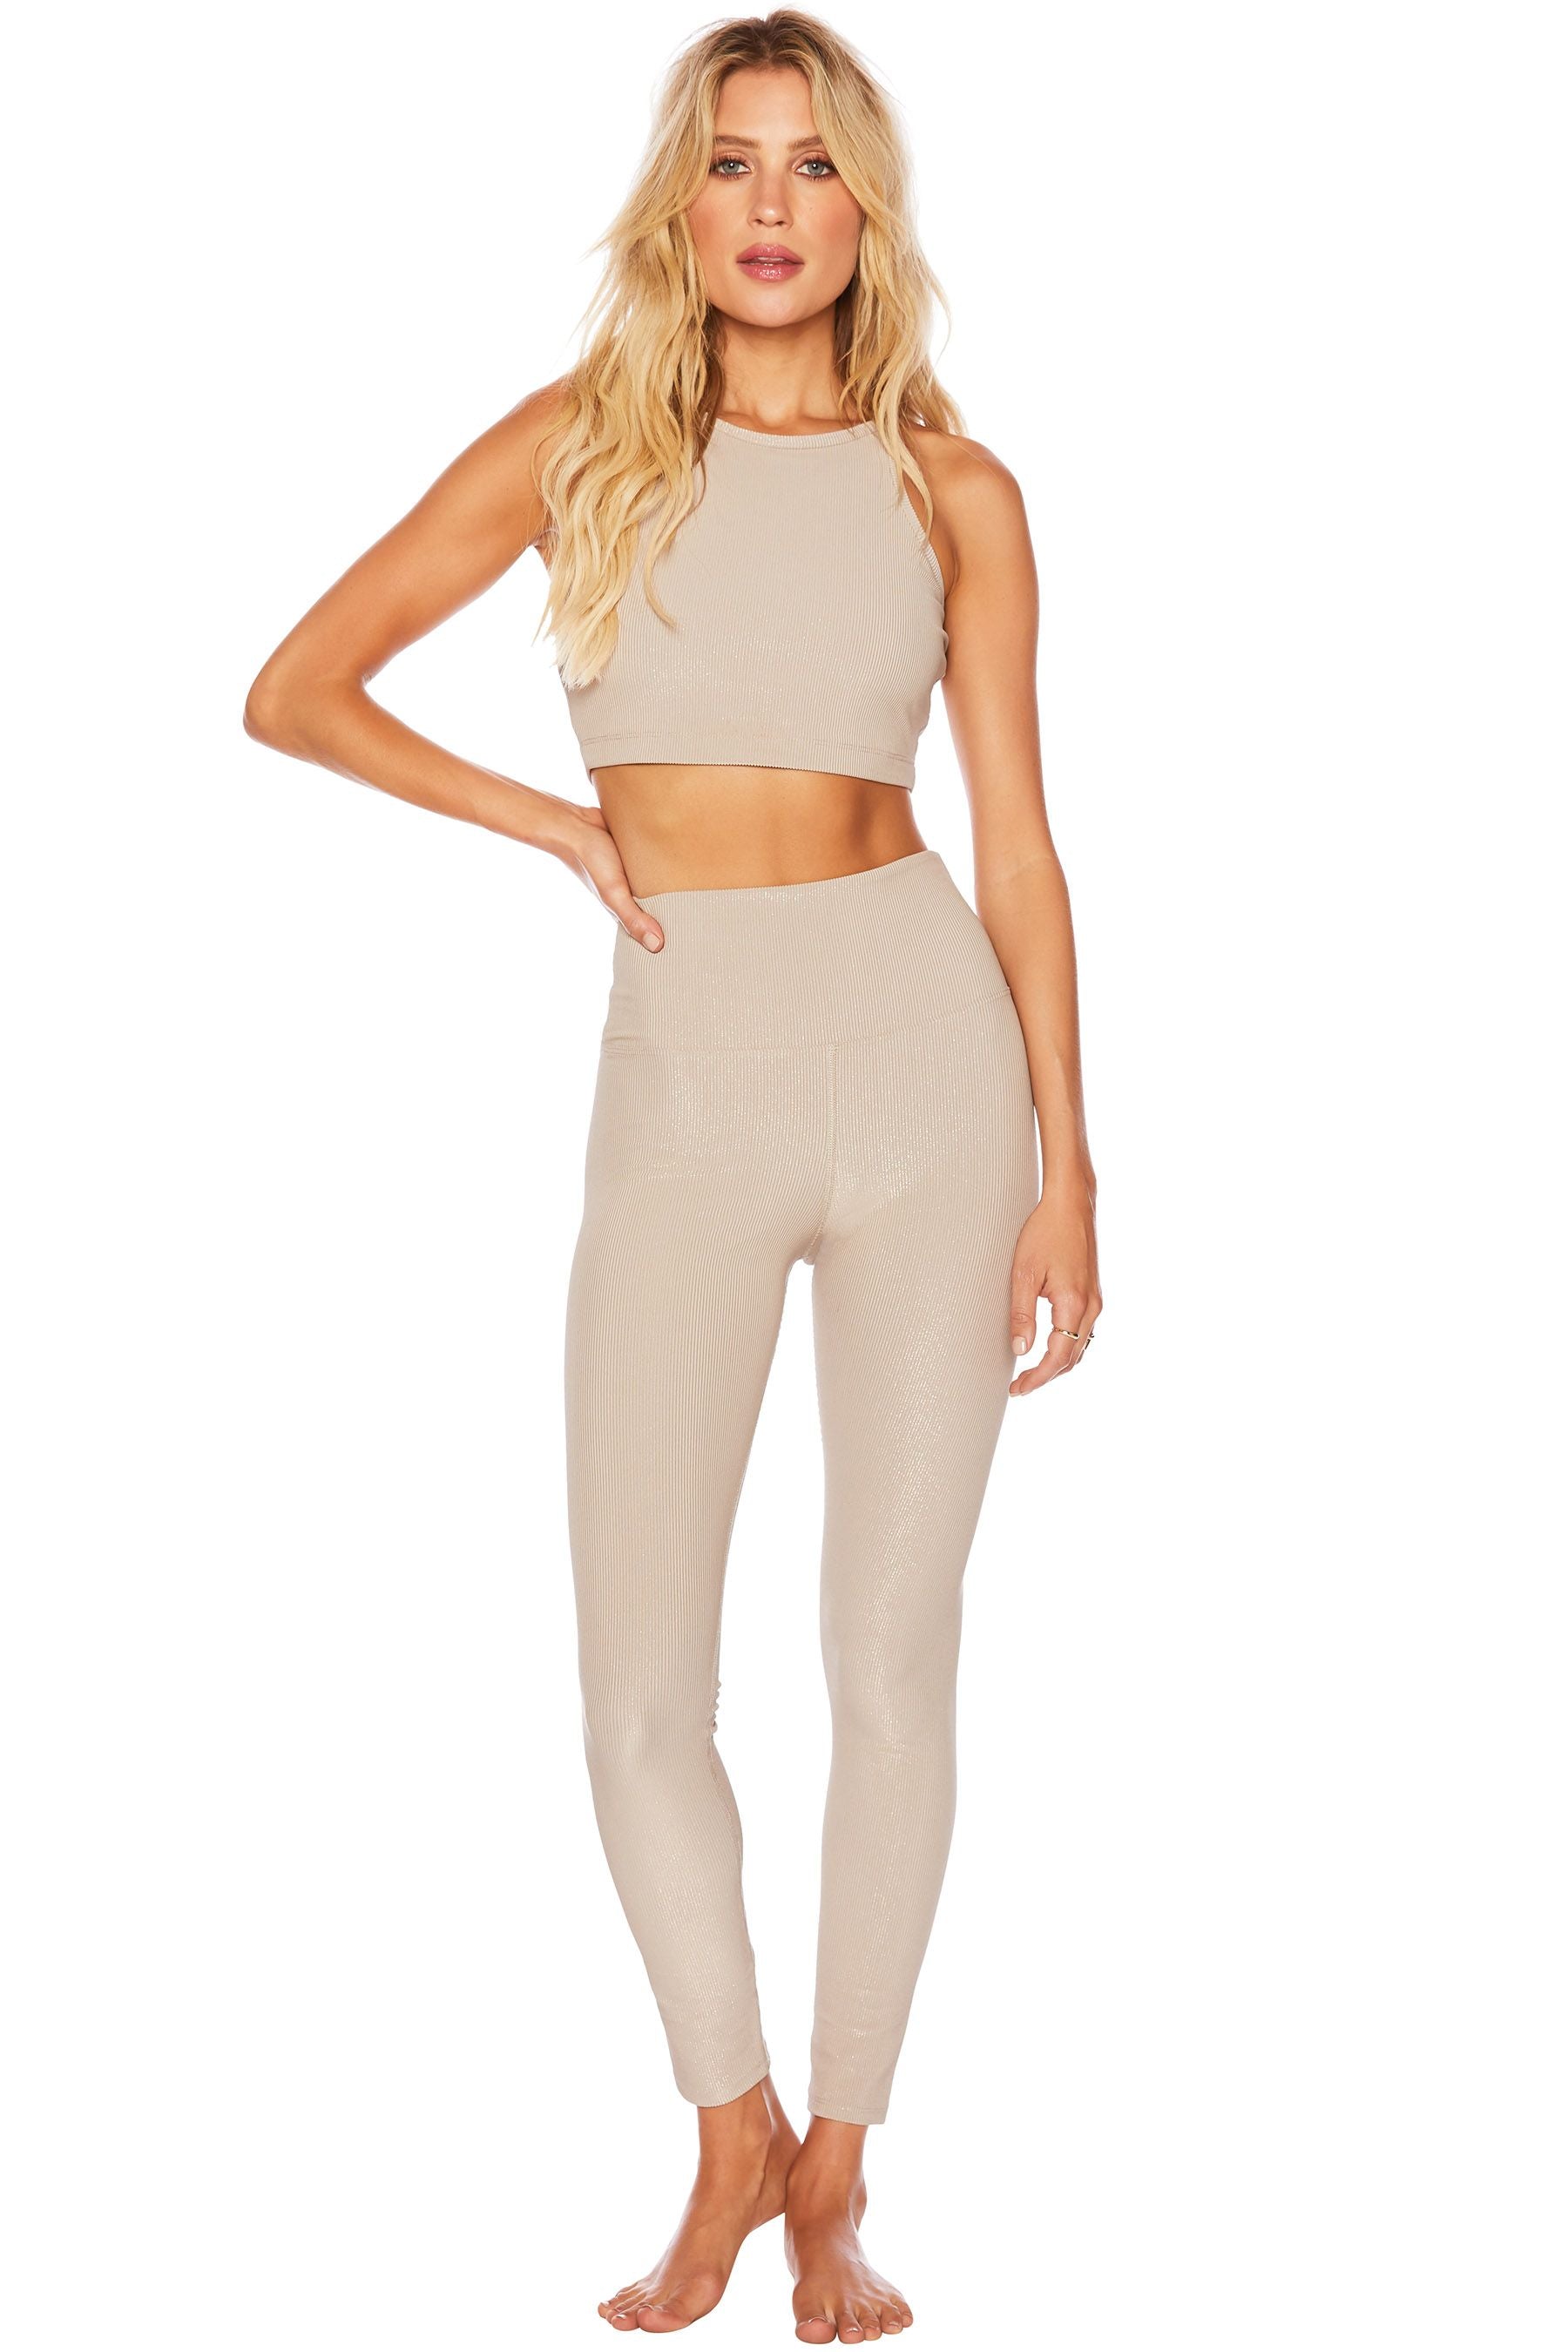 Beach Riot Glitter Anna Legging - Taupe – Trendy and Tipsy